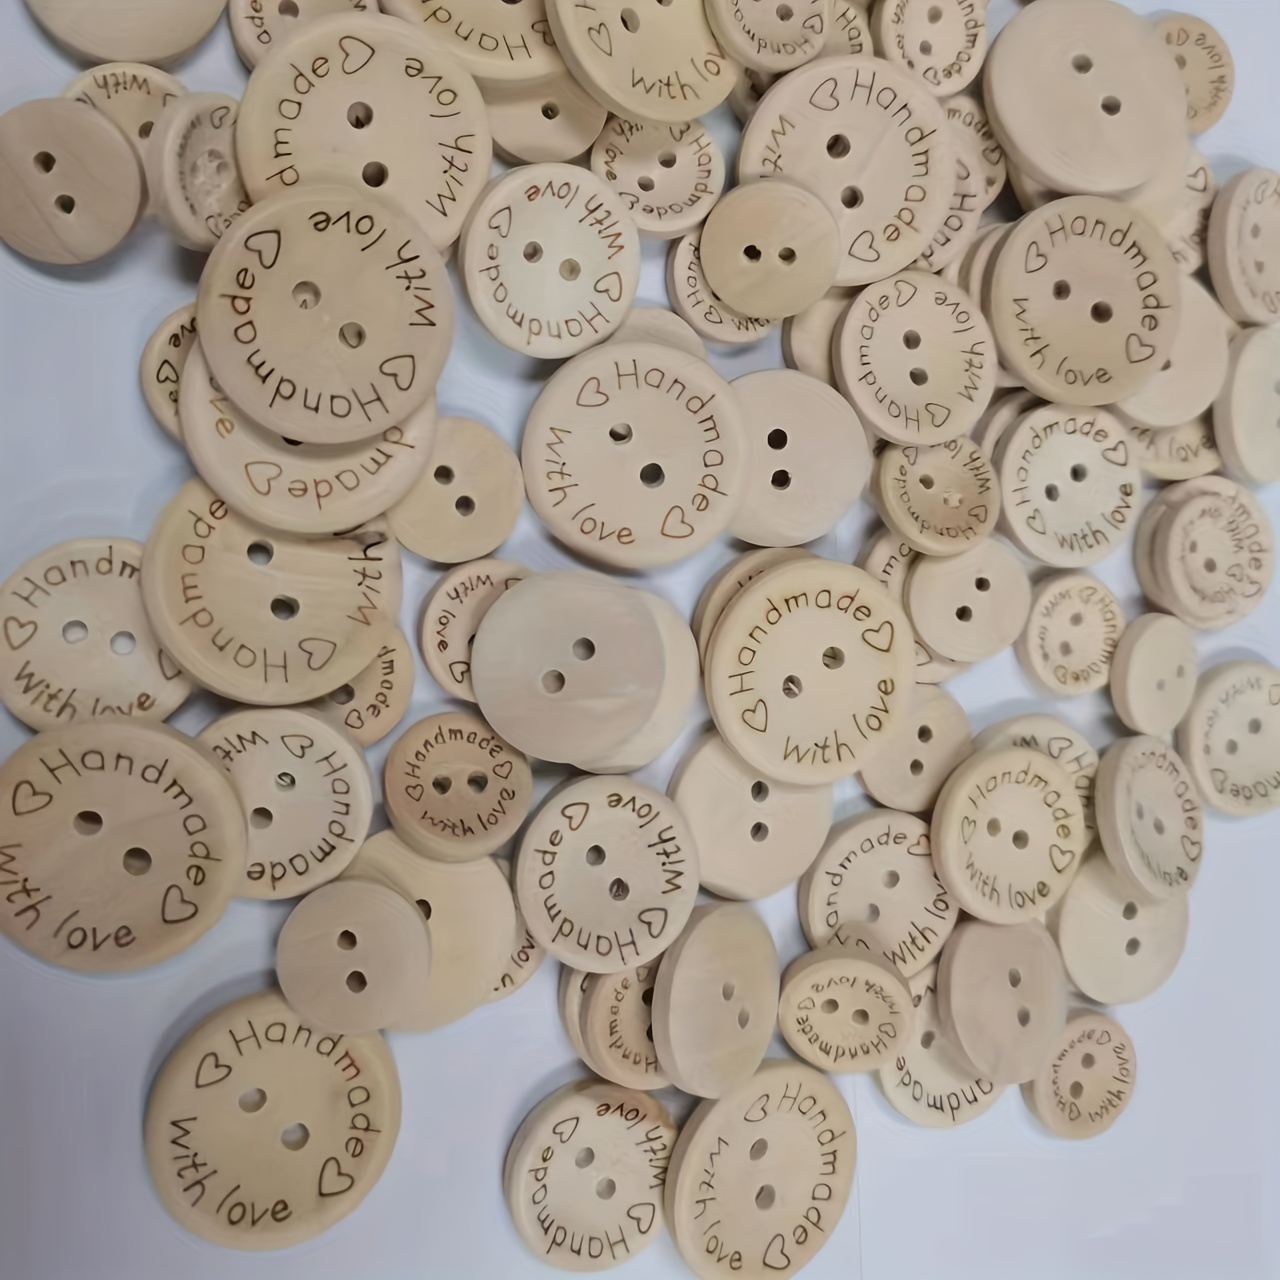  NUOMI 100Pcs Cute Wooden Craft Buttons 2 Holes